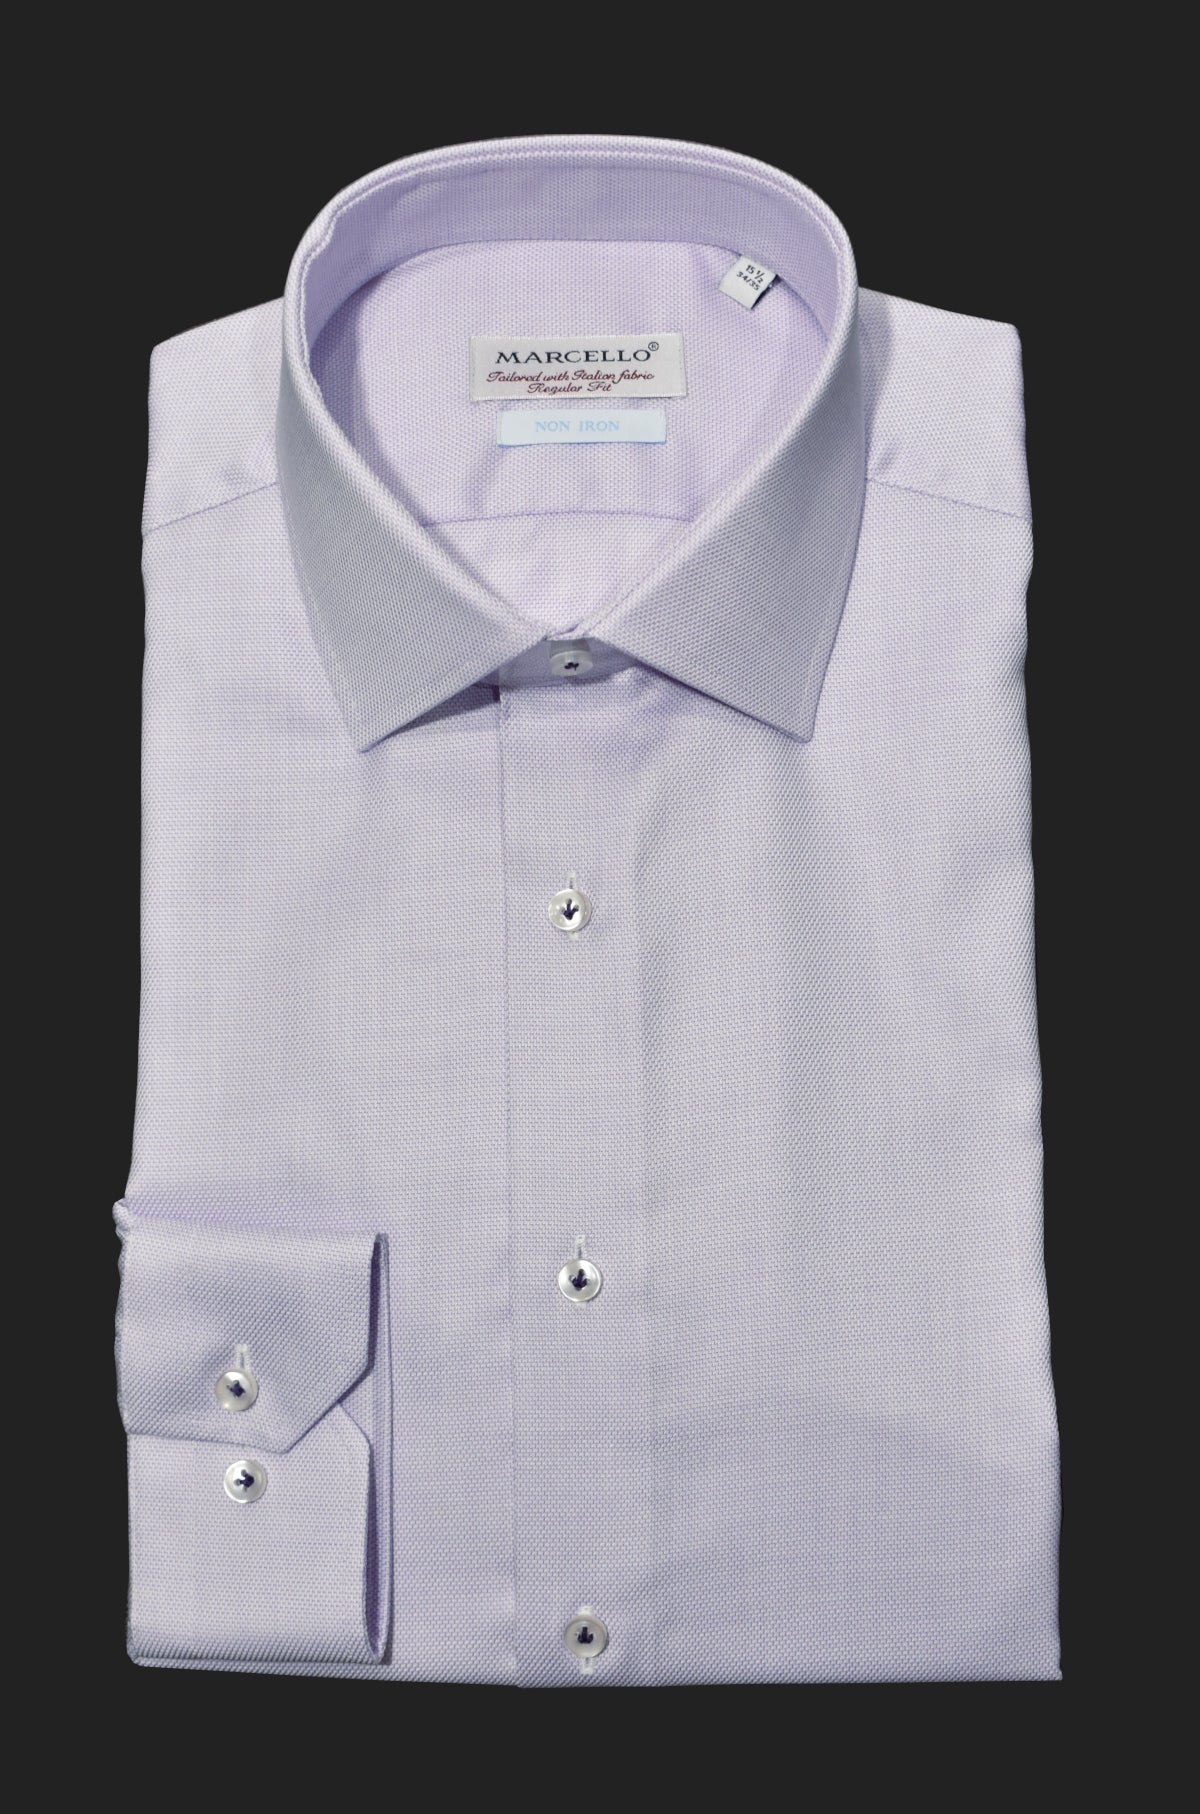 The Marcello Dress Shirt is one of the finest made shirts.  Soft, rich fabric with a slight texture exudes an unparalleled elegance.  Choose from White, Blue, Pink, Lilac or Black Extra fine, soft Italian cotton. Fine piquet textured fabric.